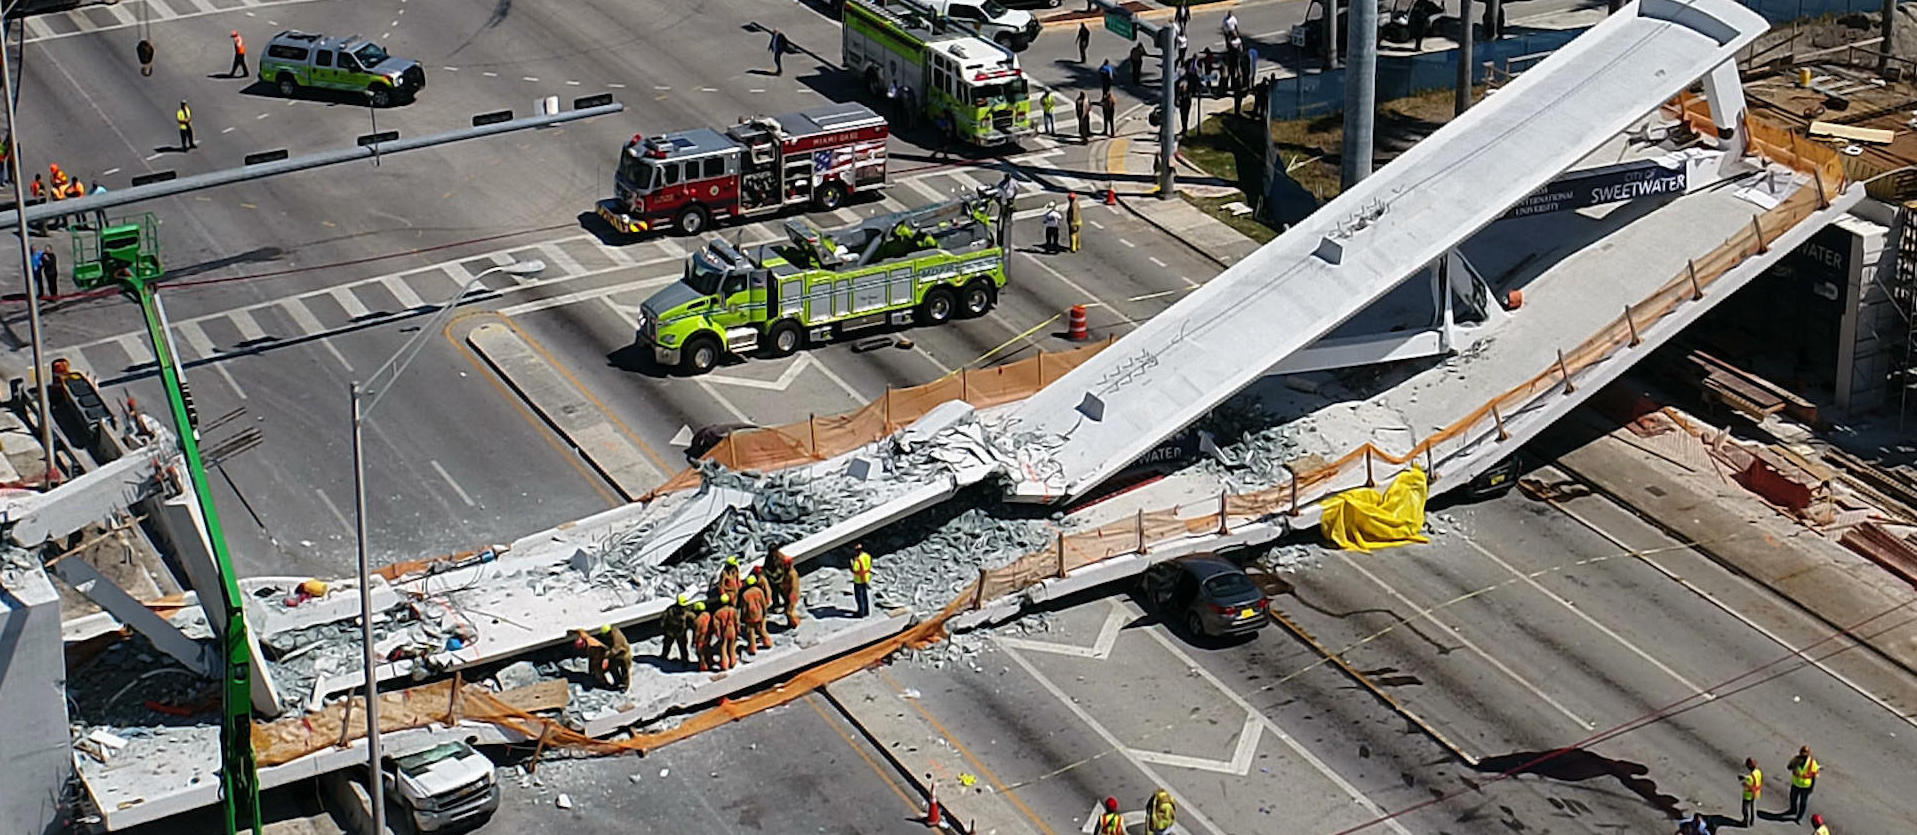 The FIU Bridge Collapse and Wrongful Death Cases